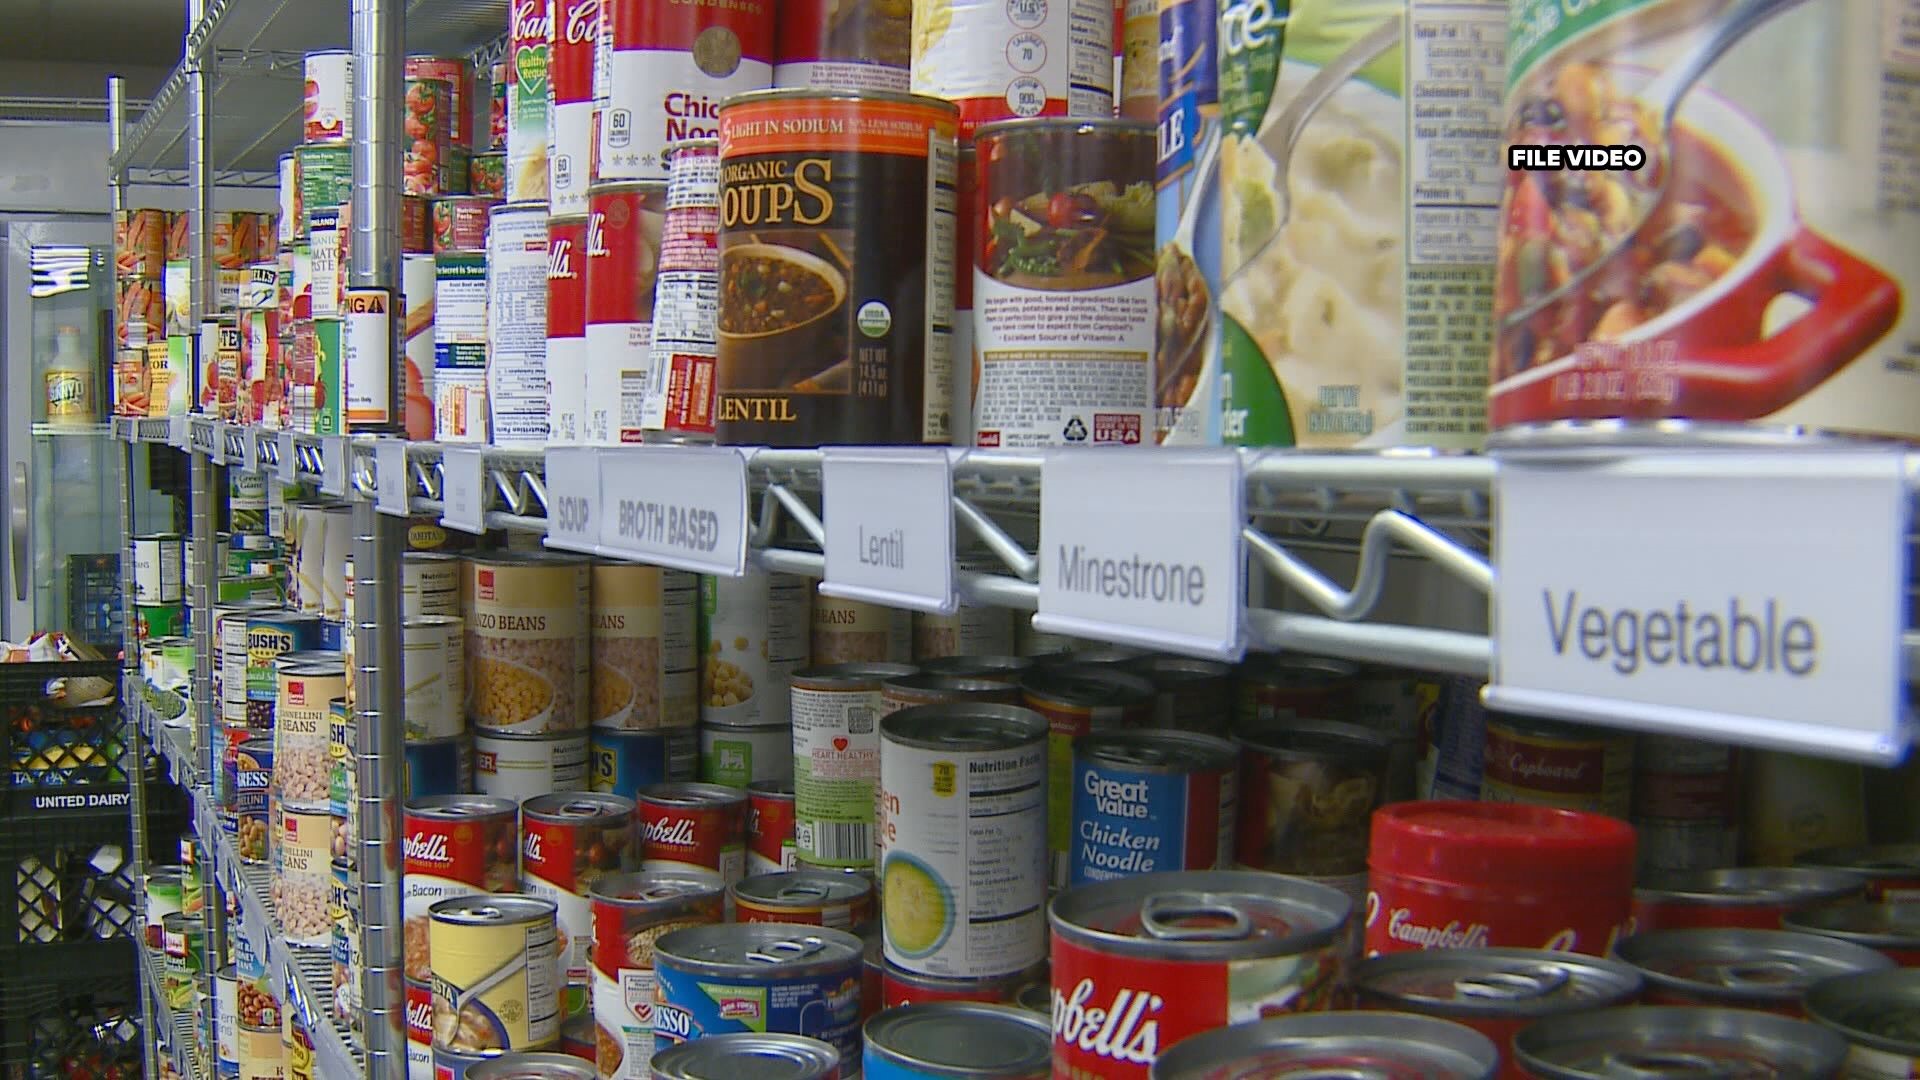 Feud to Feed campaign fights hunger in Greensboro | wfmynews2.com